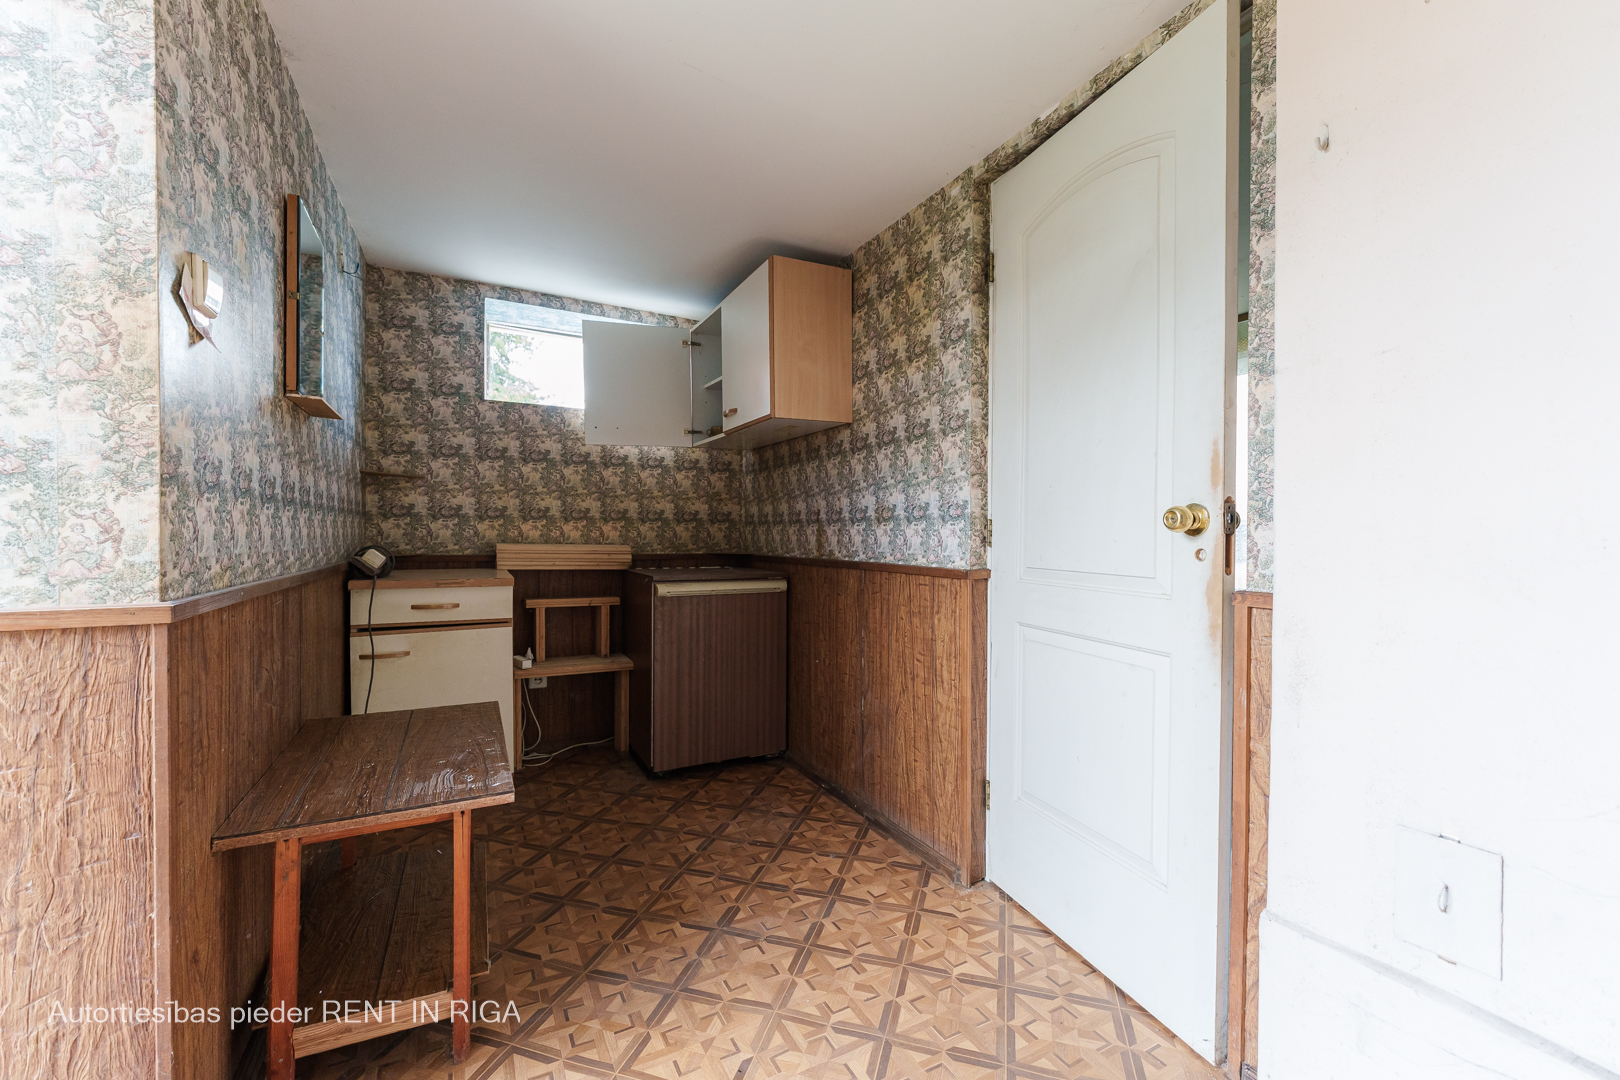 House for rent, Lieplejas - Image 1